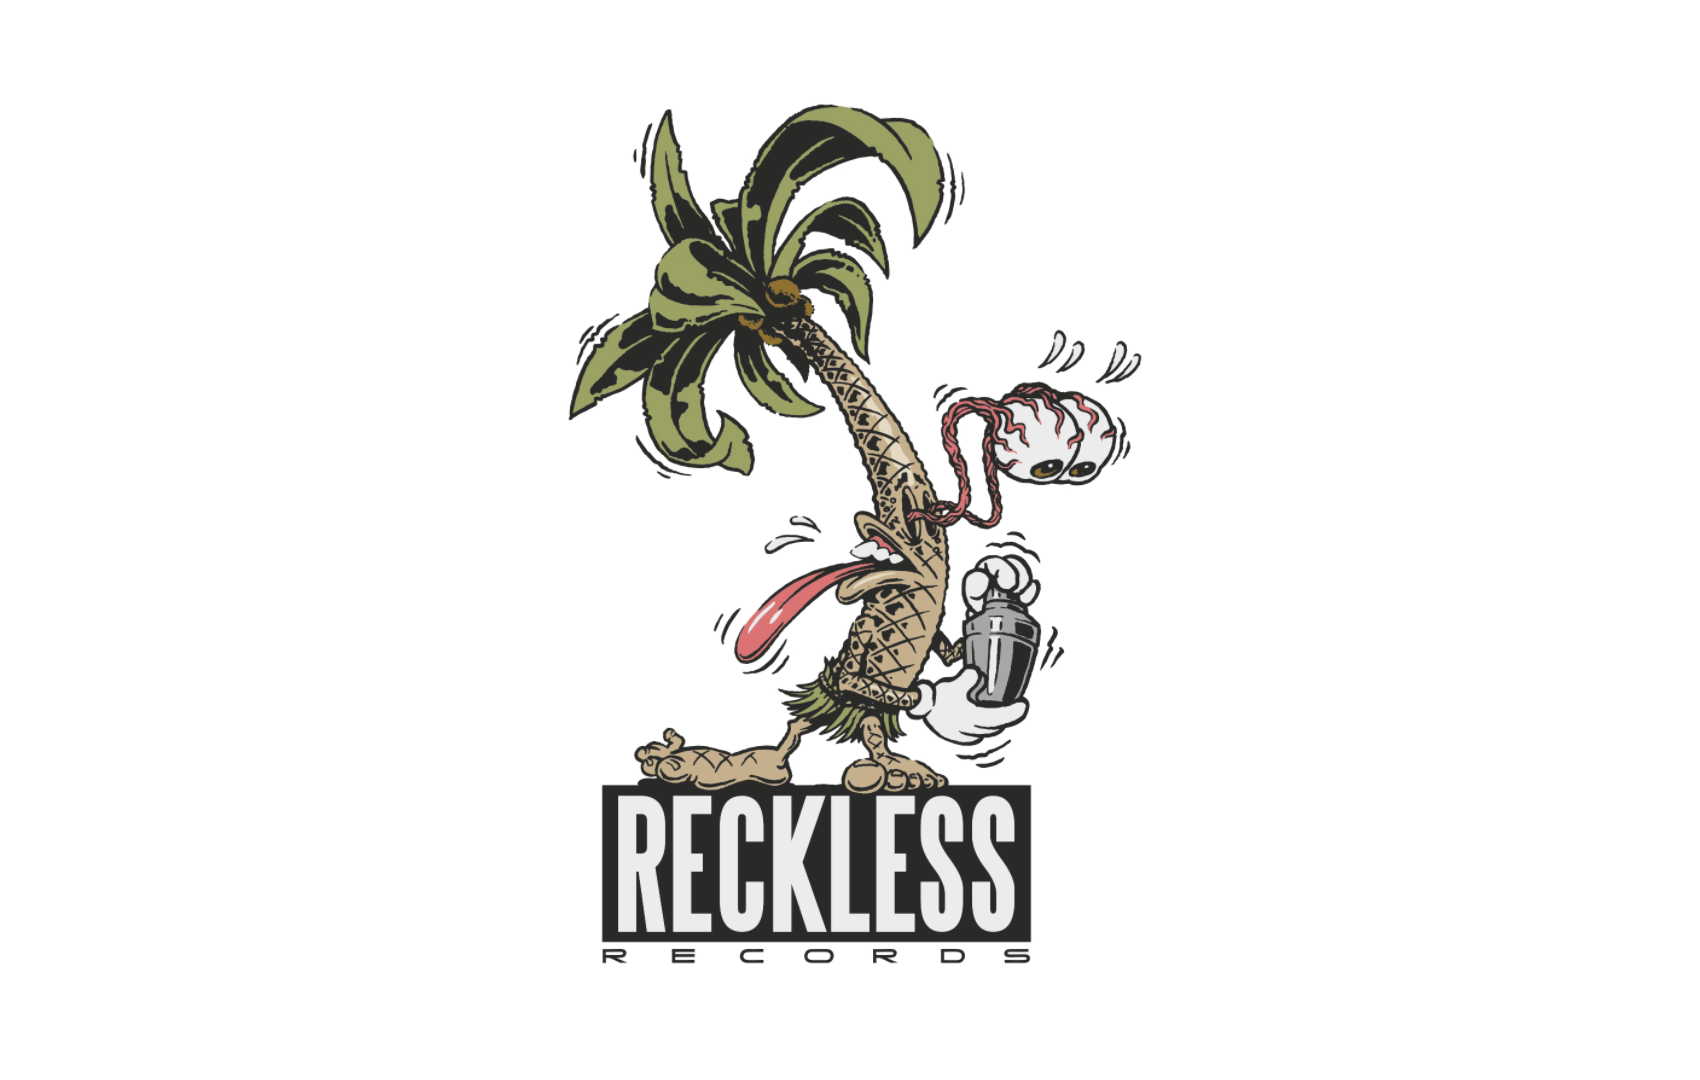 Reckless Records launches with Scot Crawford at the helm